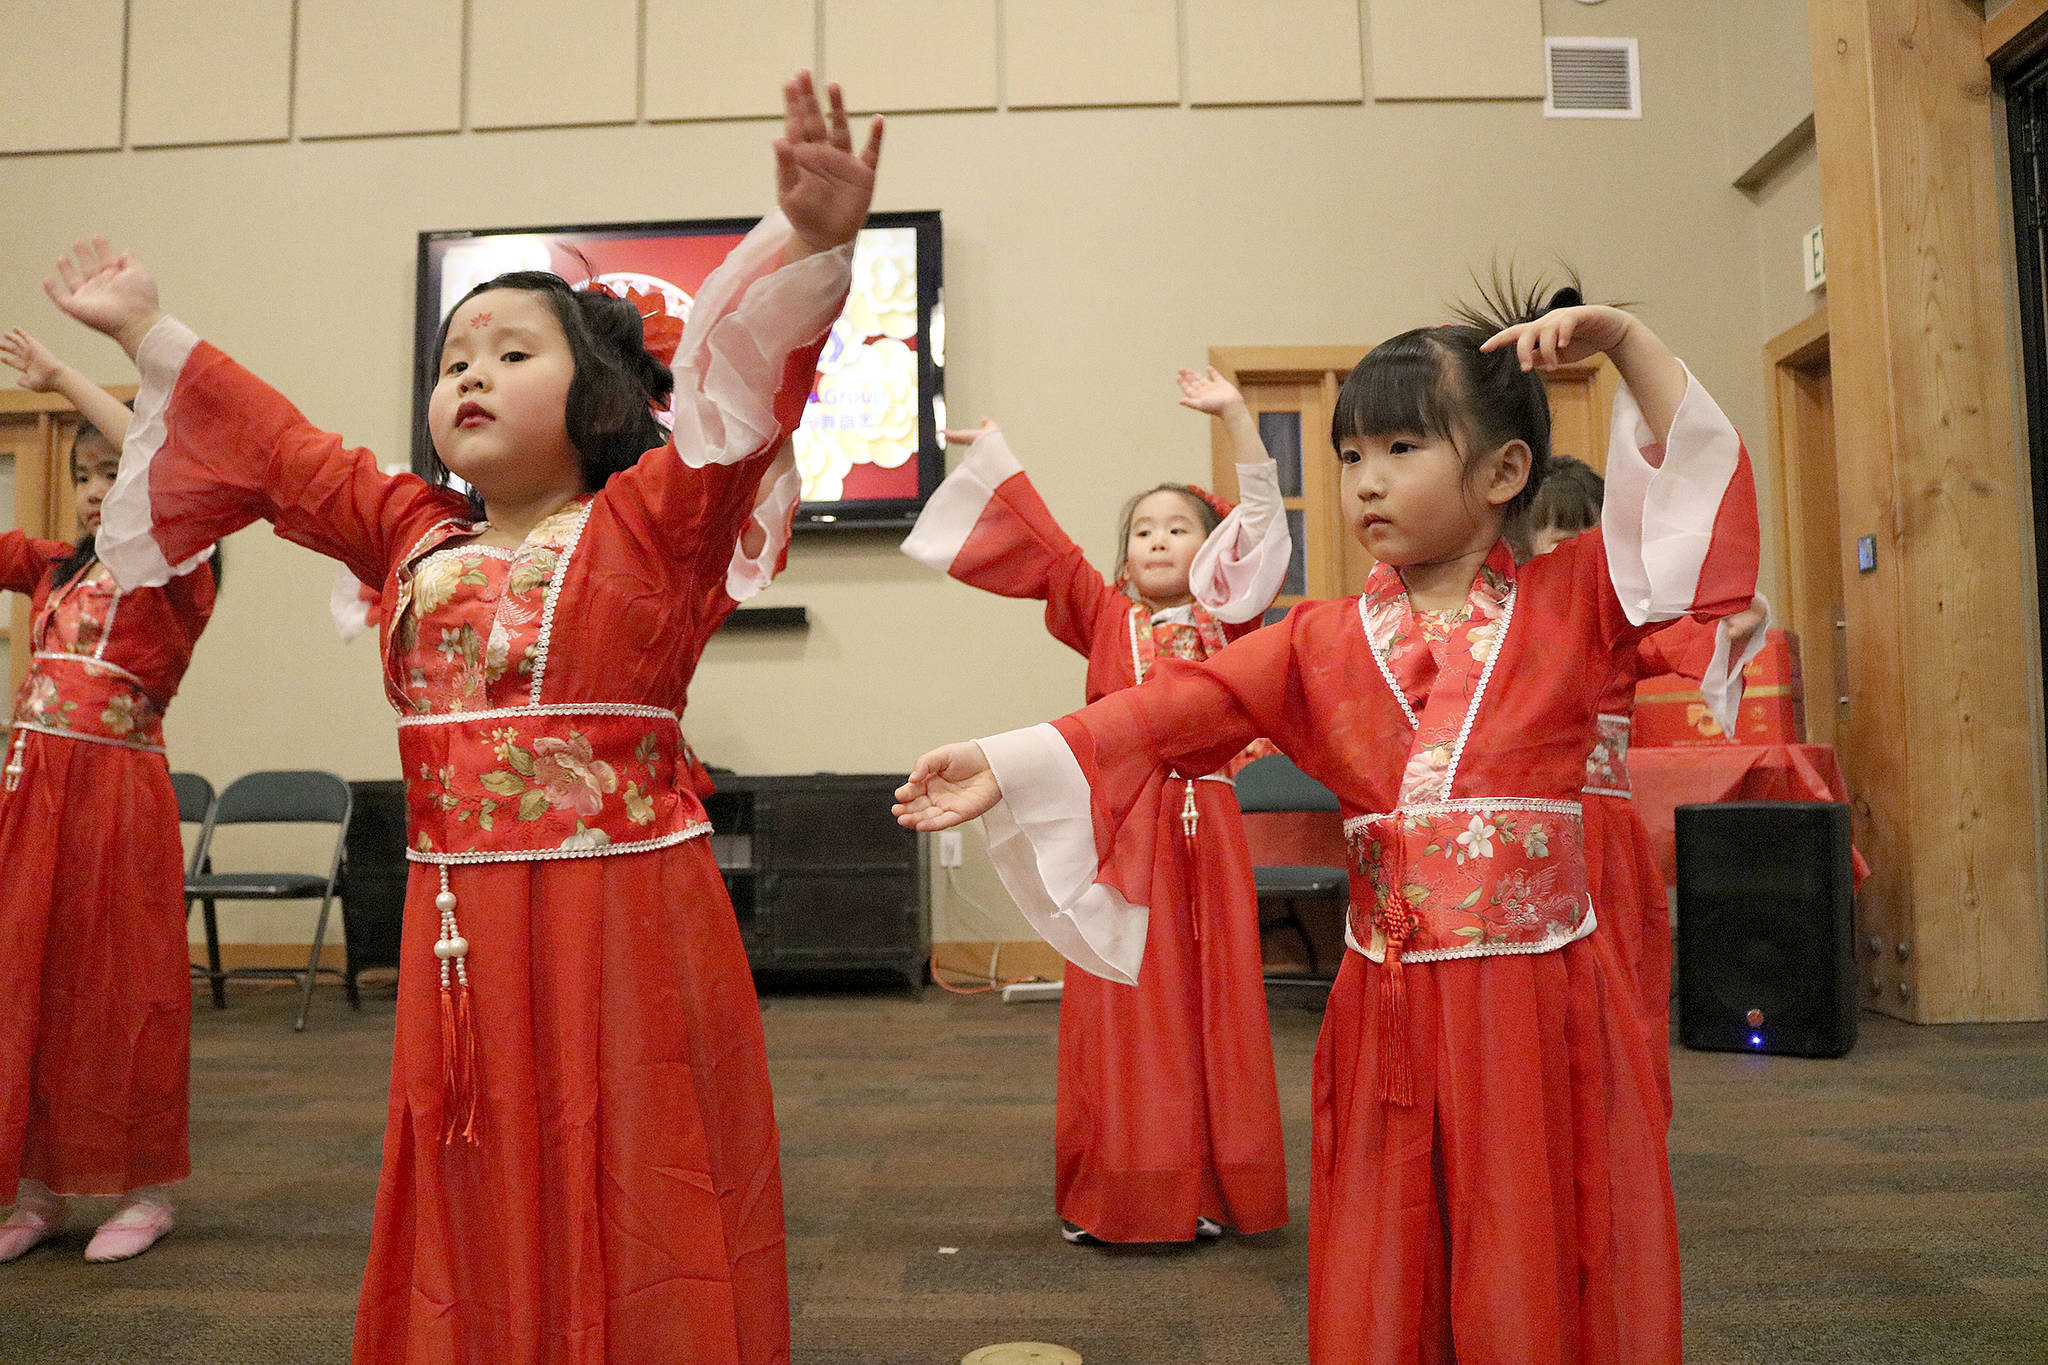 Issaquah Highlands Red Dance group preformed at the Chinese New Year celebration on Feb. 17. Stephanie Quiroz/staff photo